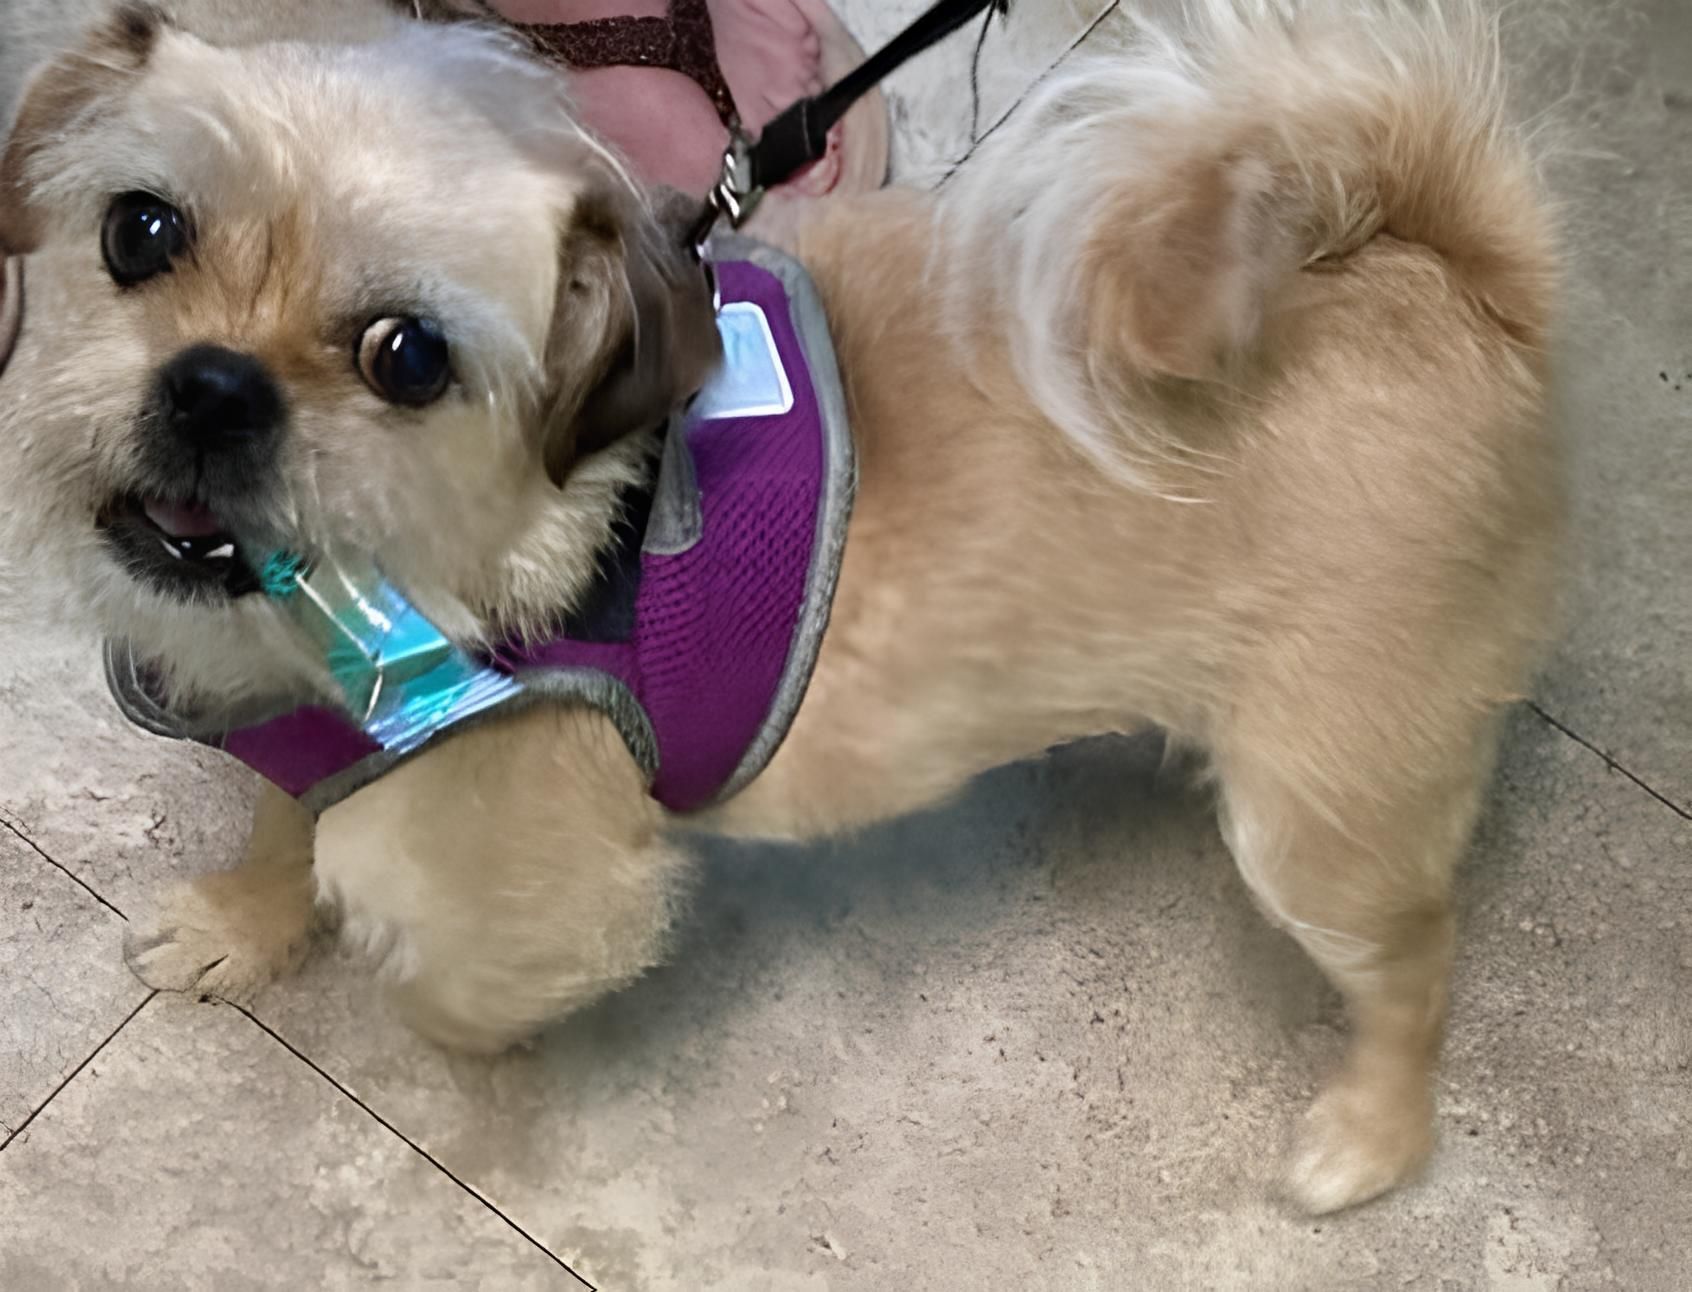 a small dog wearing a purple harness is standing on a tiled floor